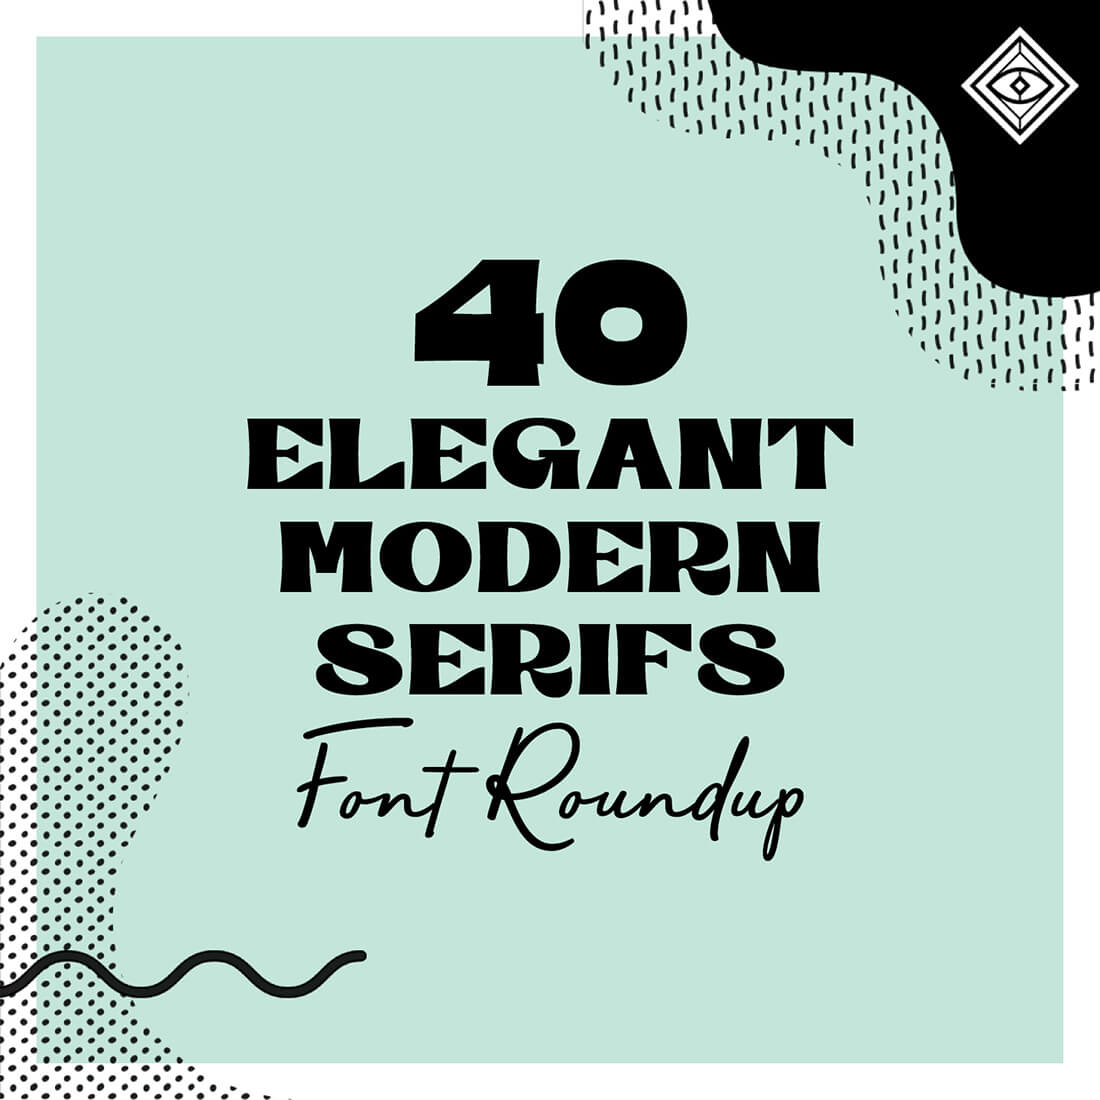 40 Modern Serif Fonts to Elevate Your Designs • Little Gold Pixel • In which I round up 40 modern serif fonts that make luxury and elegance accessible. For retro and sophisticated designs alike.